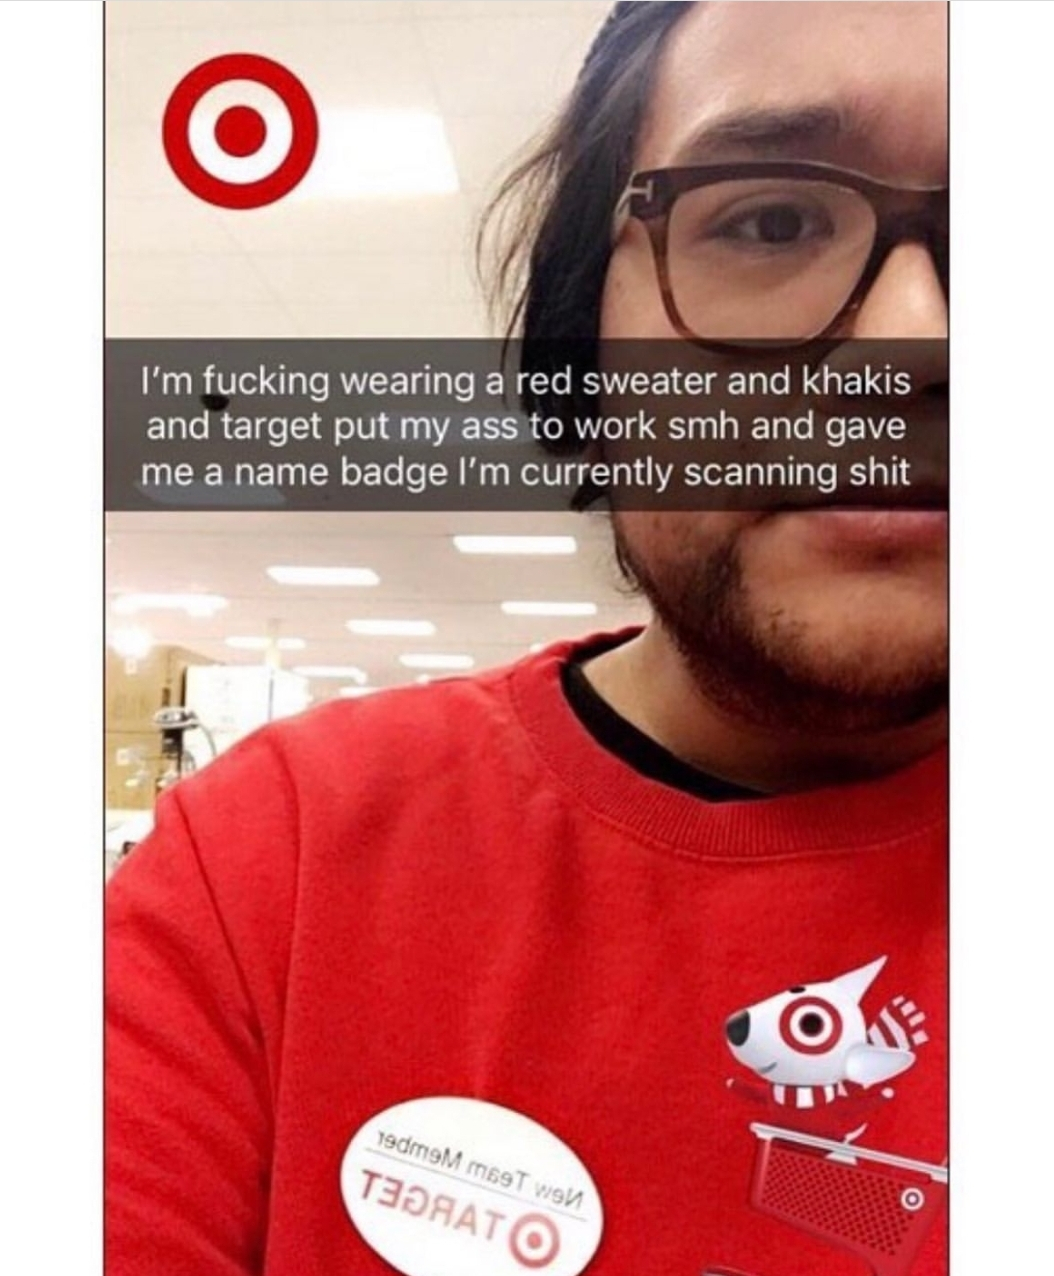 wearing a red shirt to target - I'm fucking wearing a red sweater and khakis and target put my ass to work smh and gave me a name badge I'm currently scanning shit Ok dom Torato